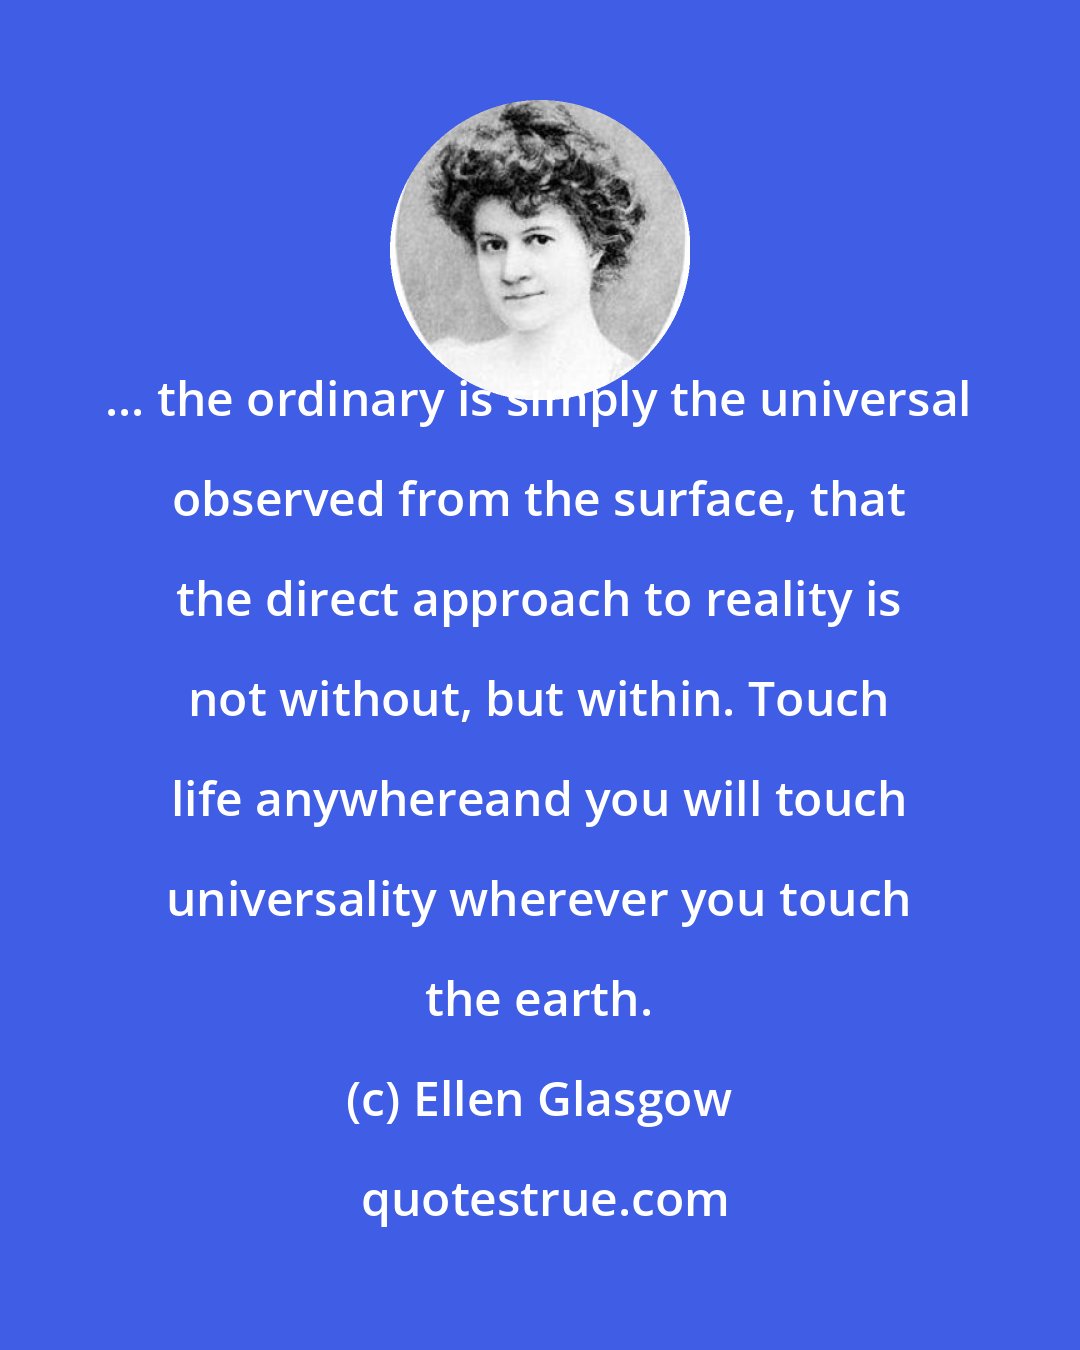 Ellen Glasgow: ... the ordinary is simply the universal observed from the surface, that the direct approach to reality is not without, but within. Touch life anywhereand you will touch universality wherever you touch the earth.